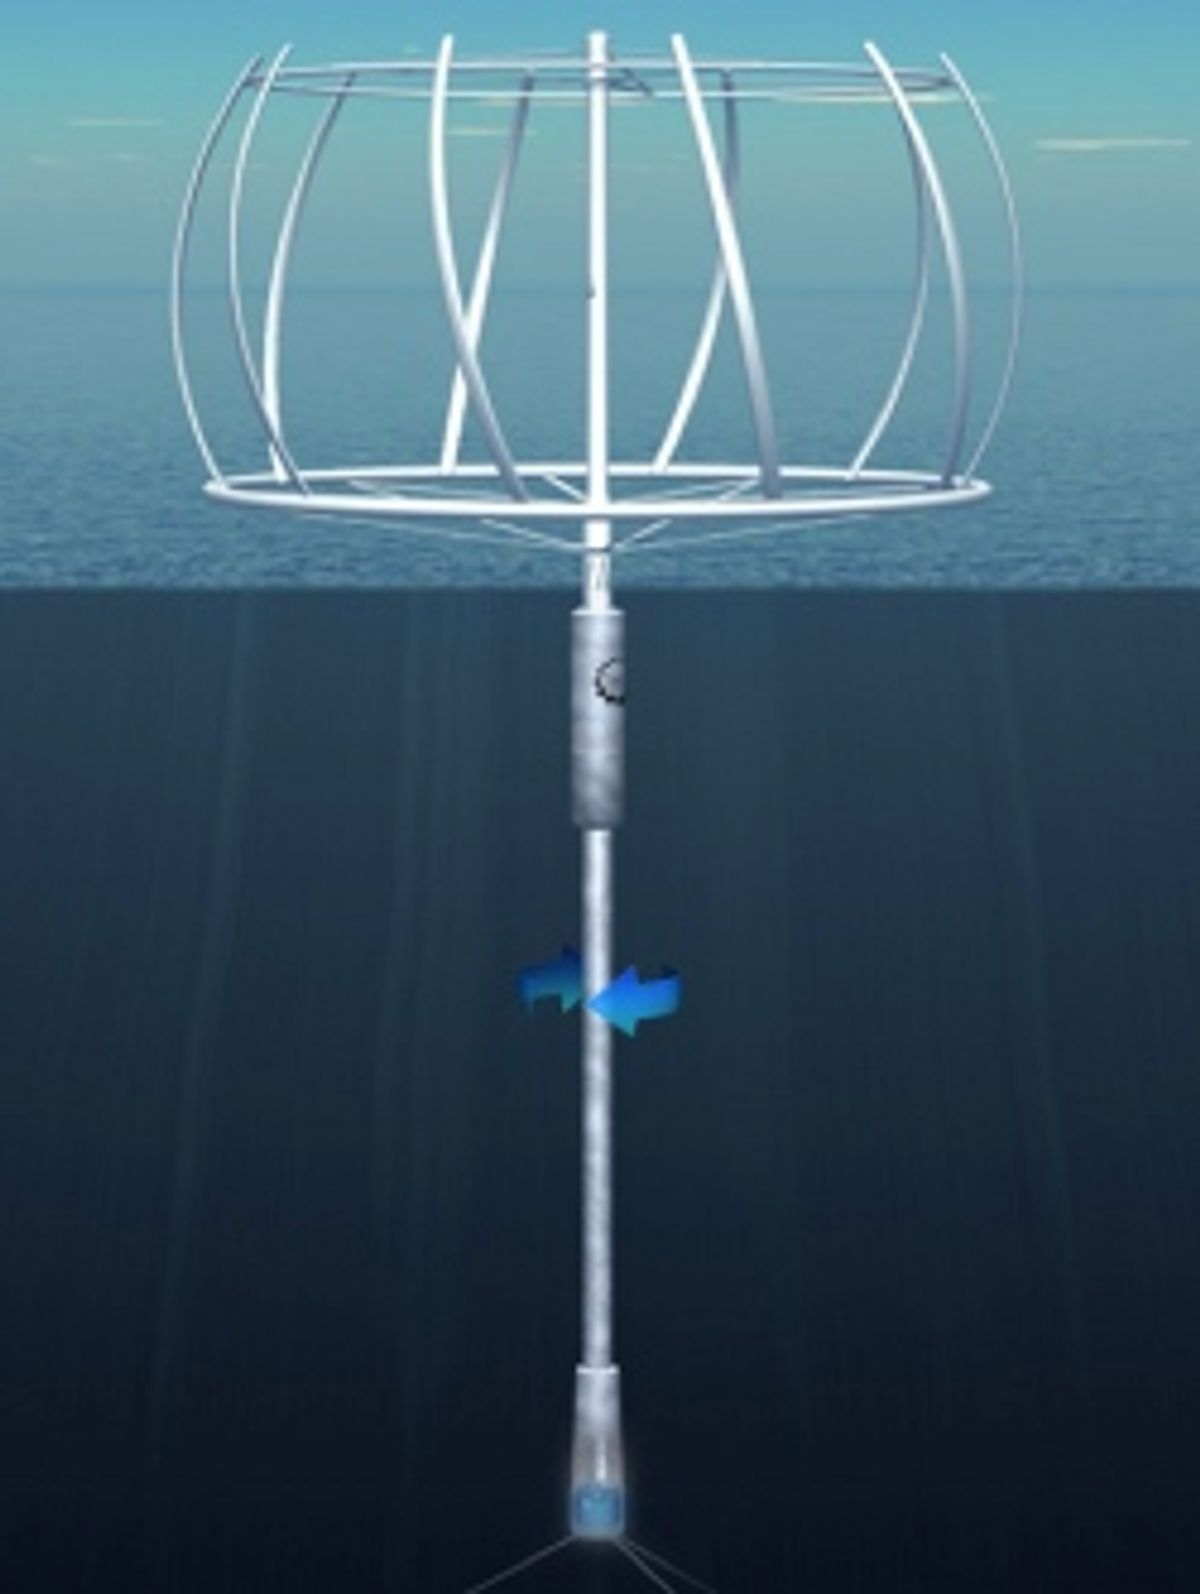 Twirling for Power: New Offshore Turbine Design Can Store Energy